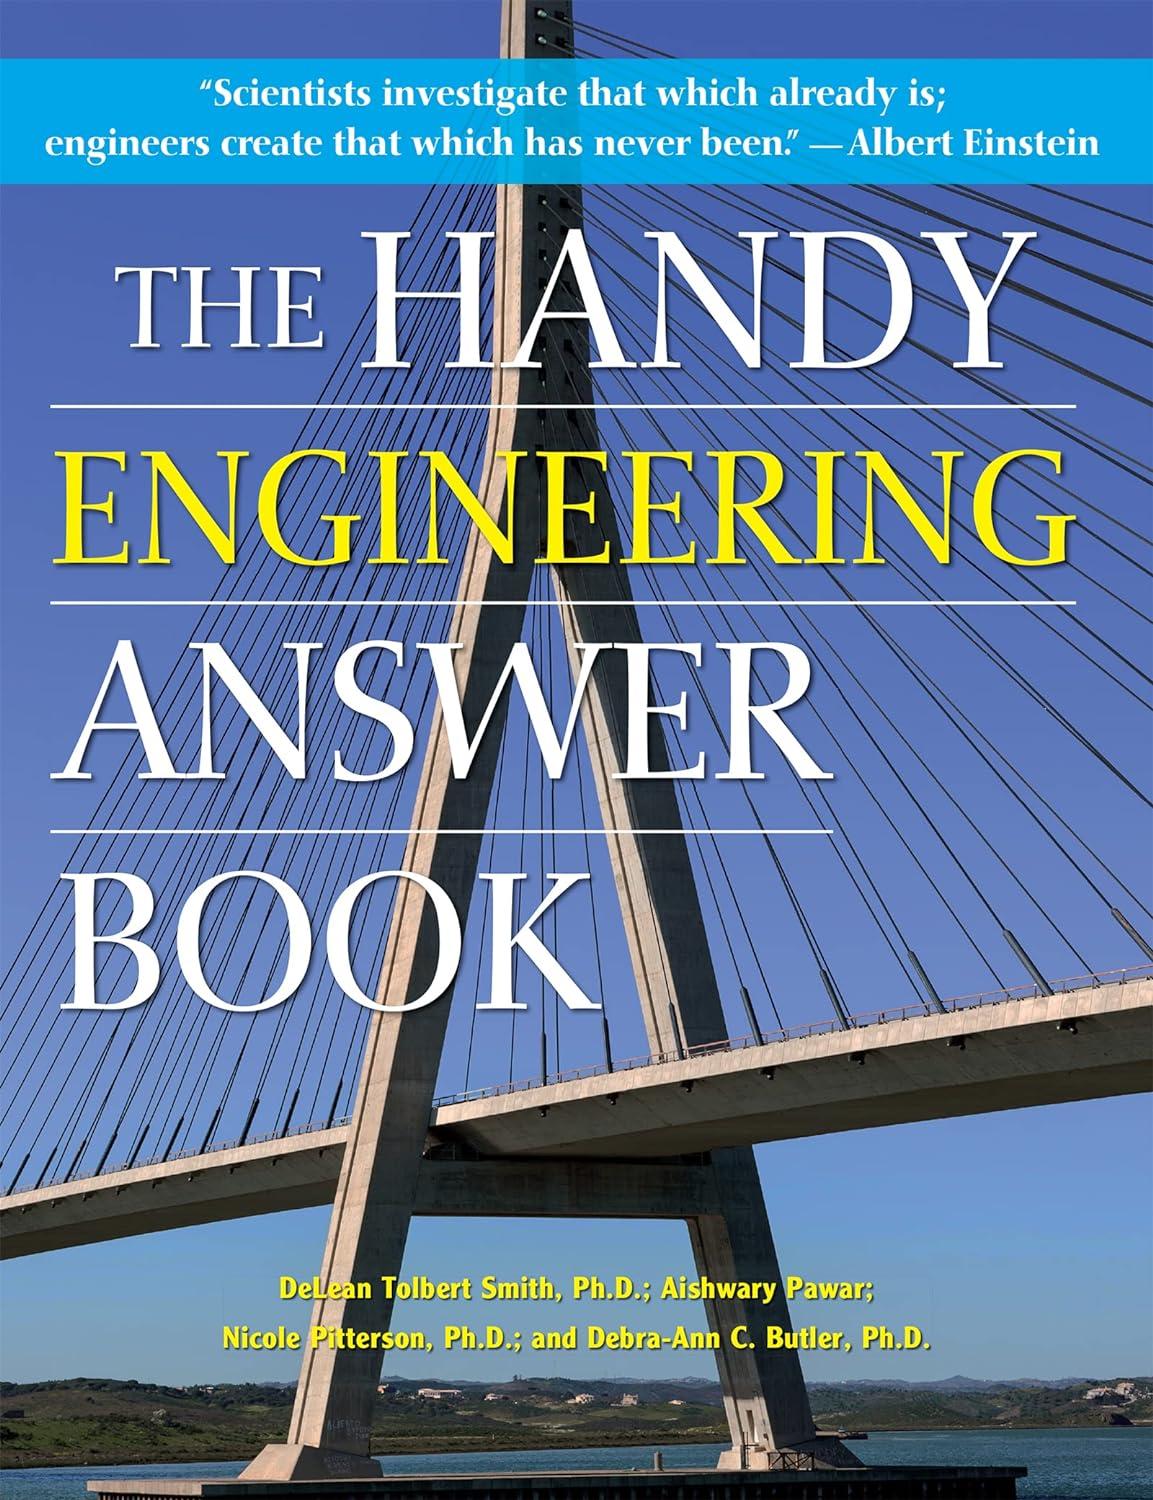 the handy engineering answer book 1st edition delean tolbert smith ph.d., aishwary pawar, nicole p. pitterson